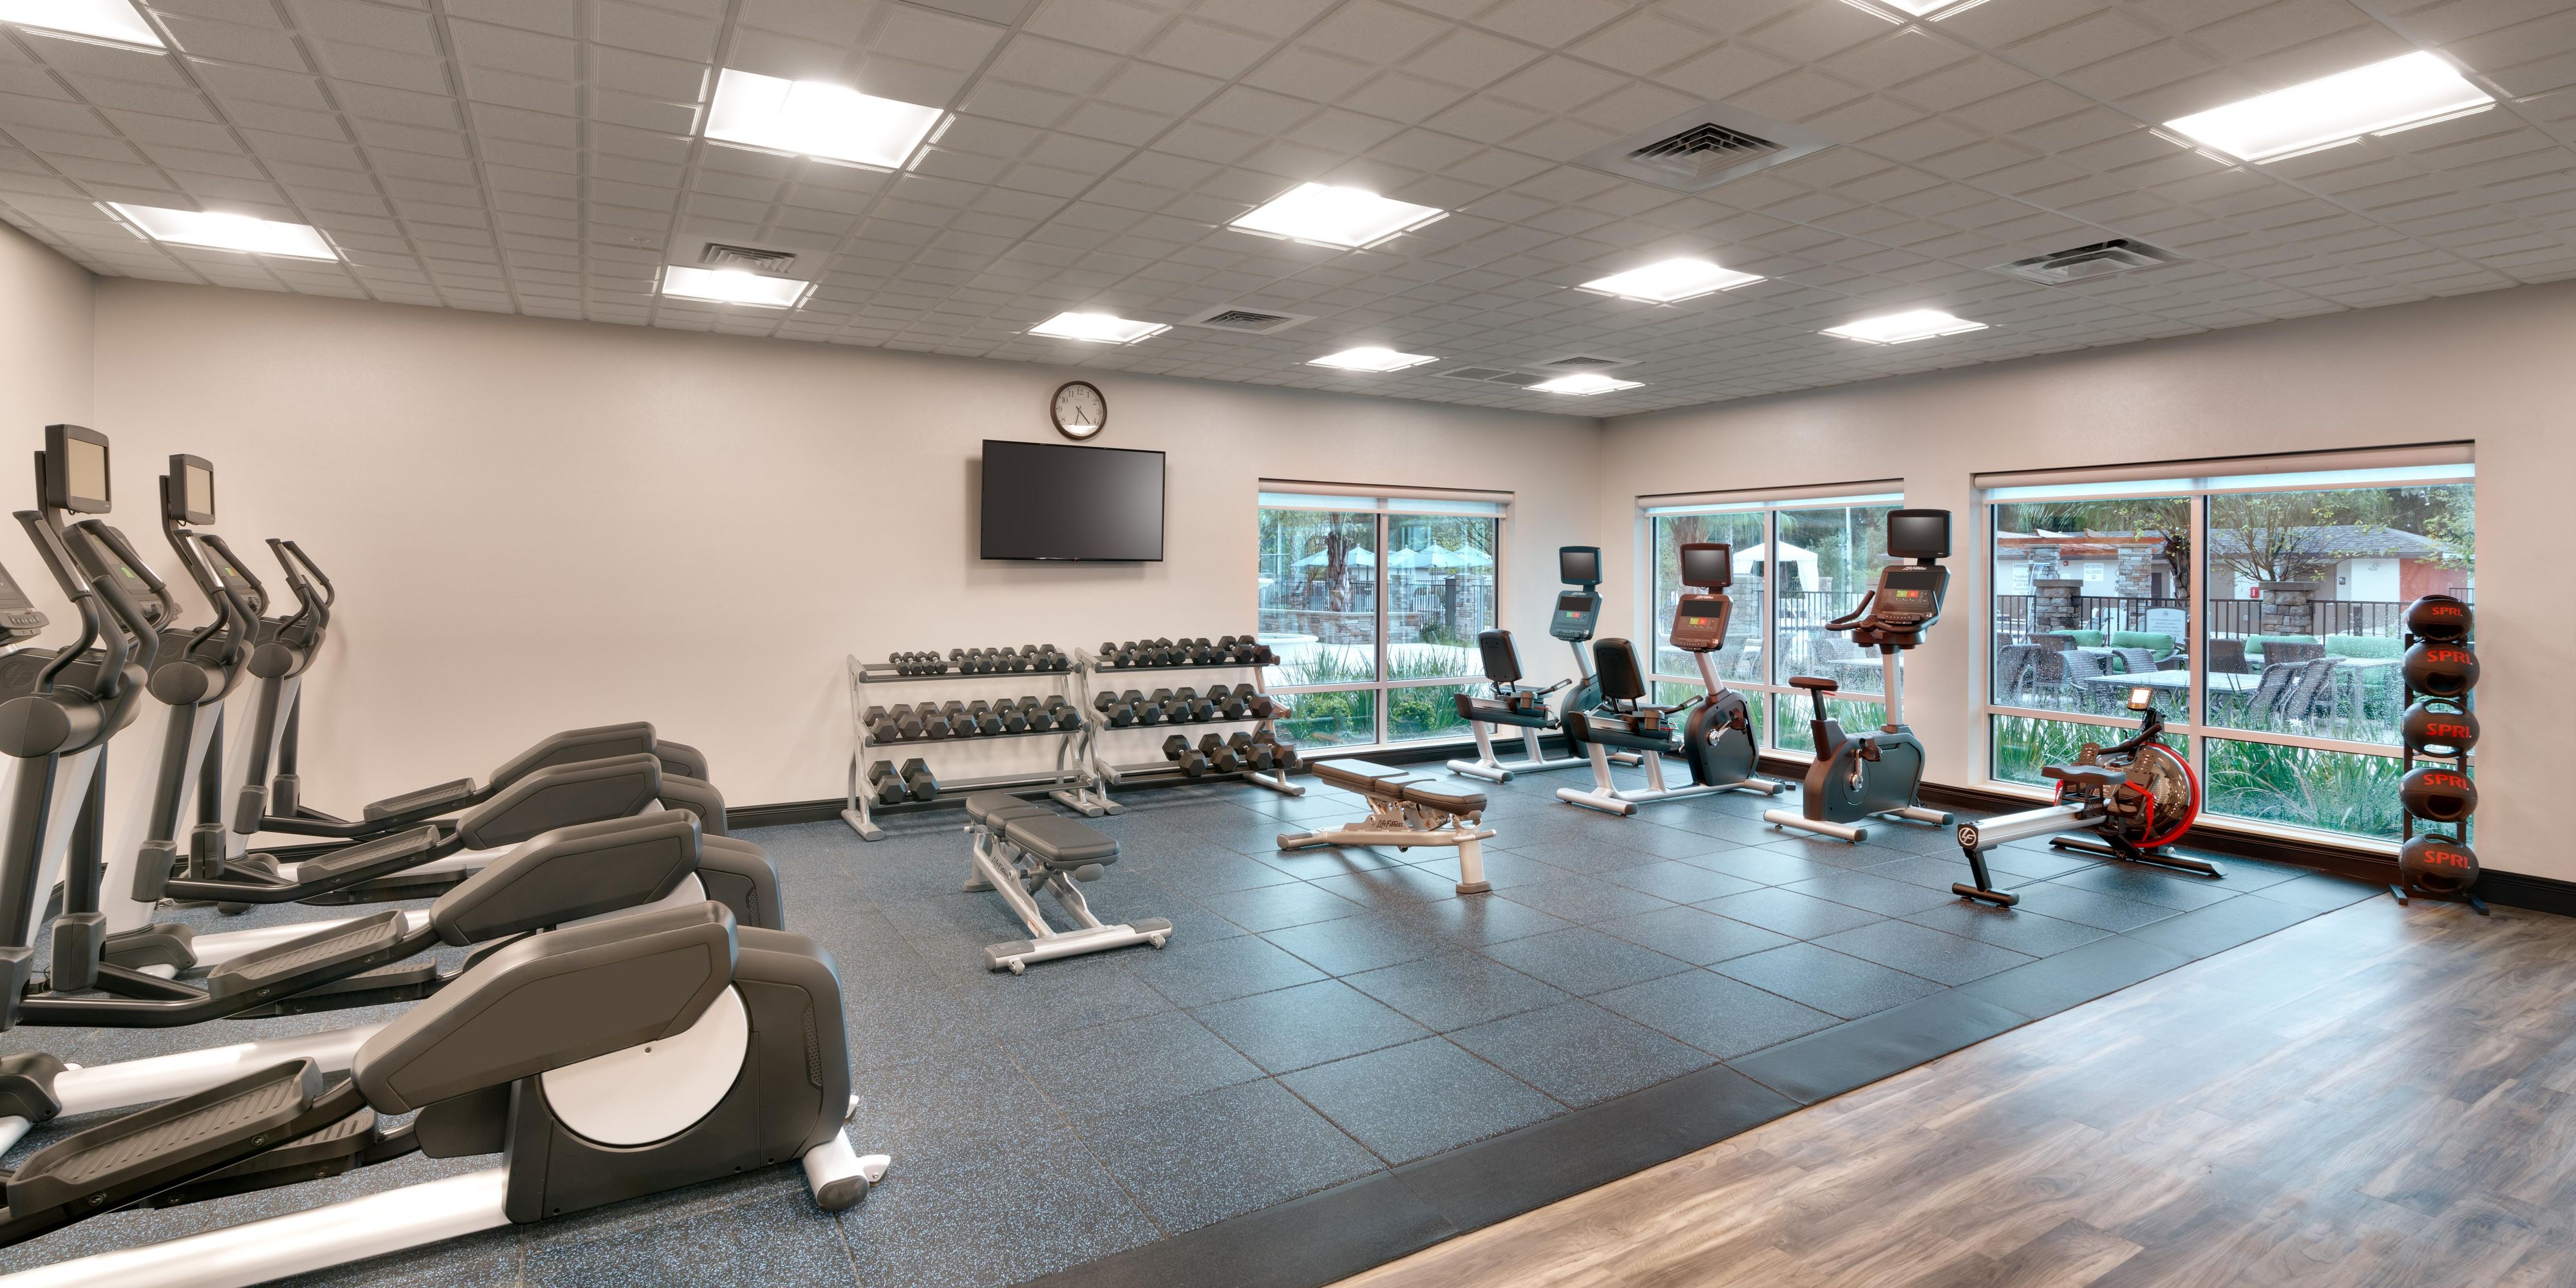 Our Fitness Center is state of the art, offering a variety of workouts to keep active while you are away.